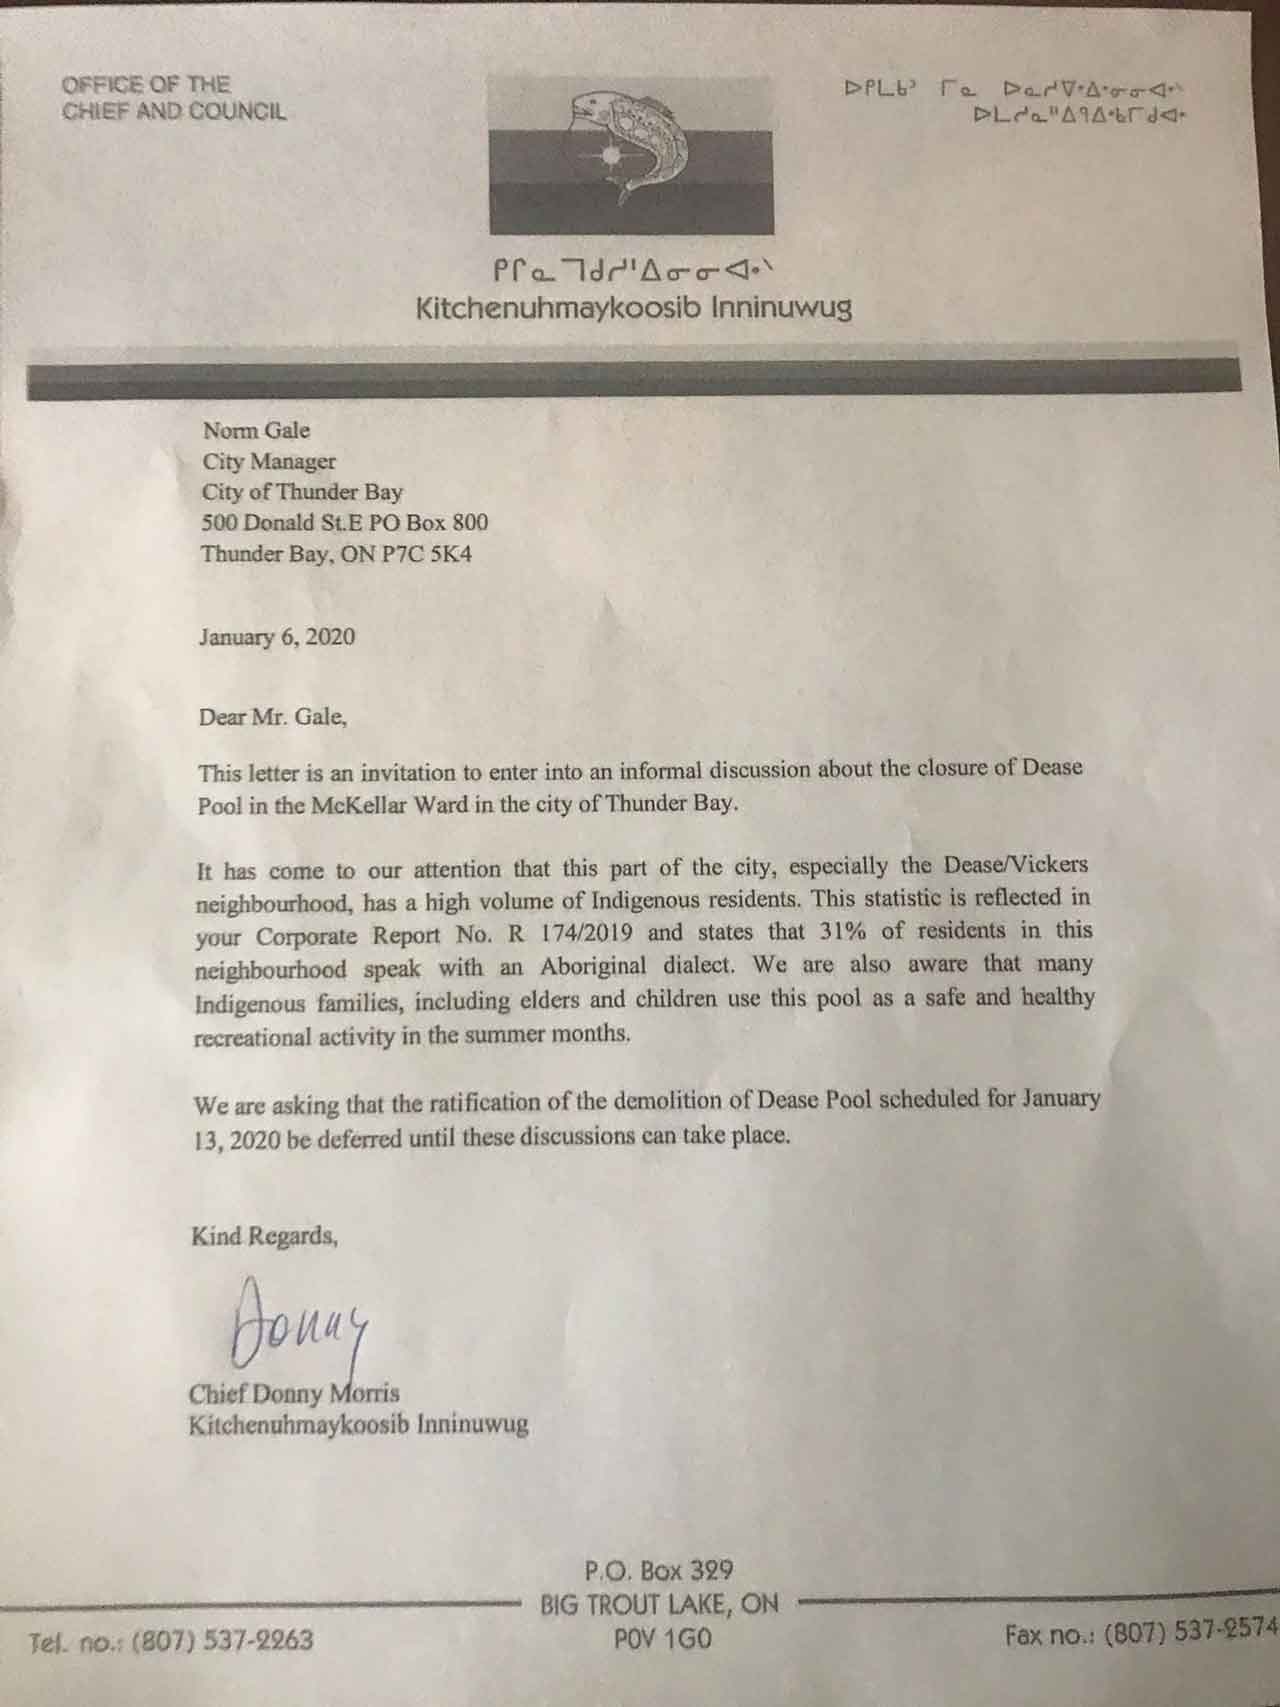 Copy of Letter to City of Thunder Bay Manager Norm Gale from KI Chief Donny Morris